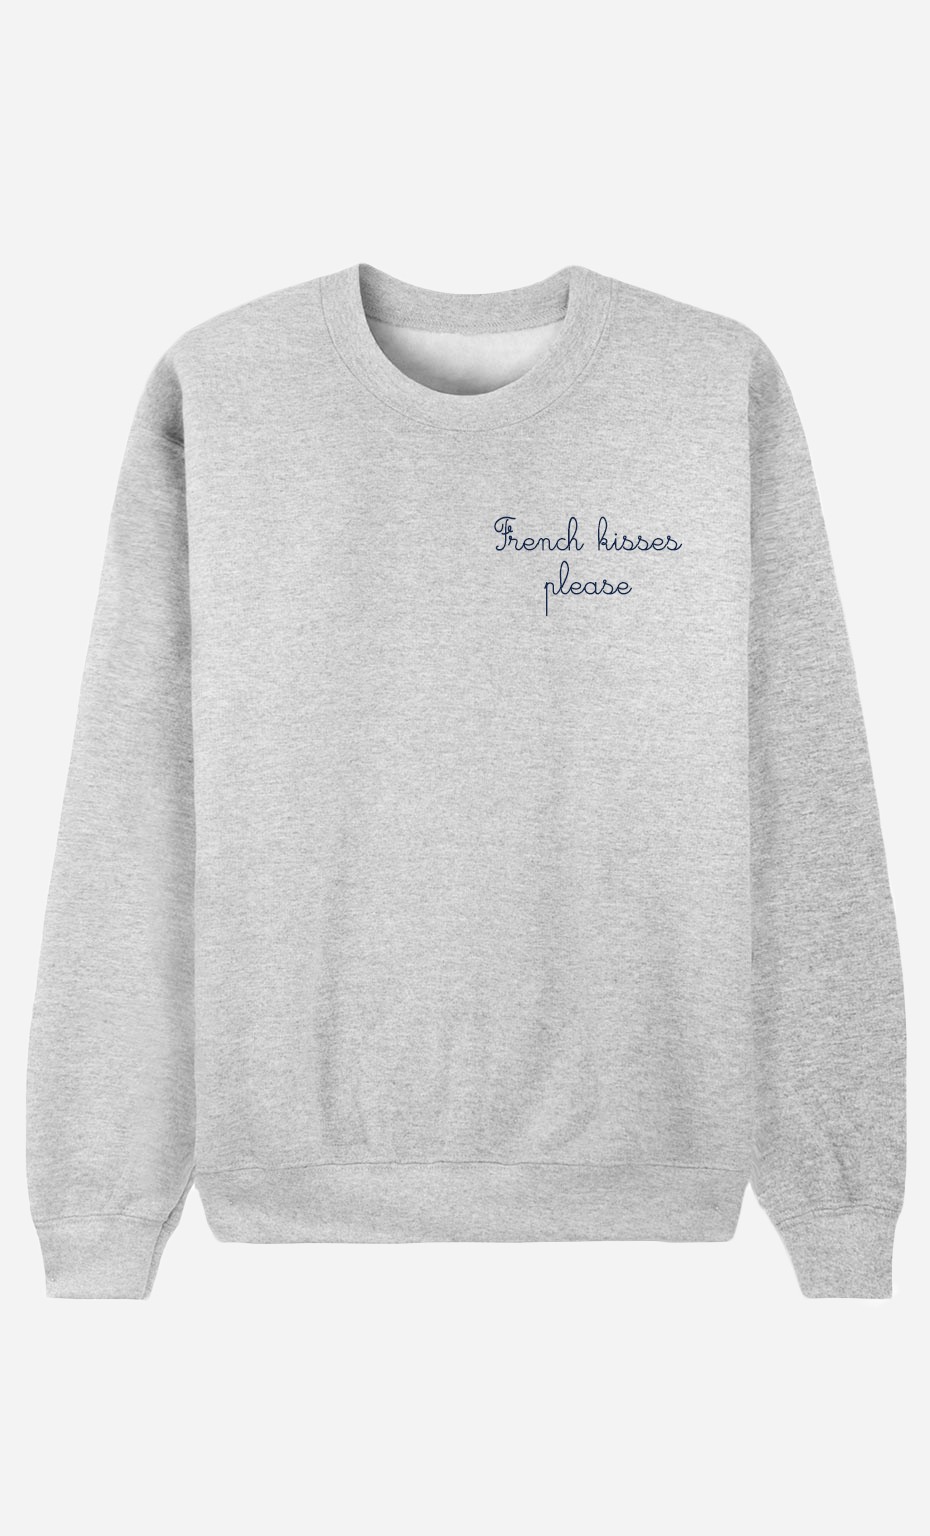 Sweatshirt French Kisses Please - embroidered